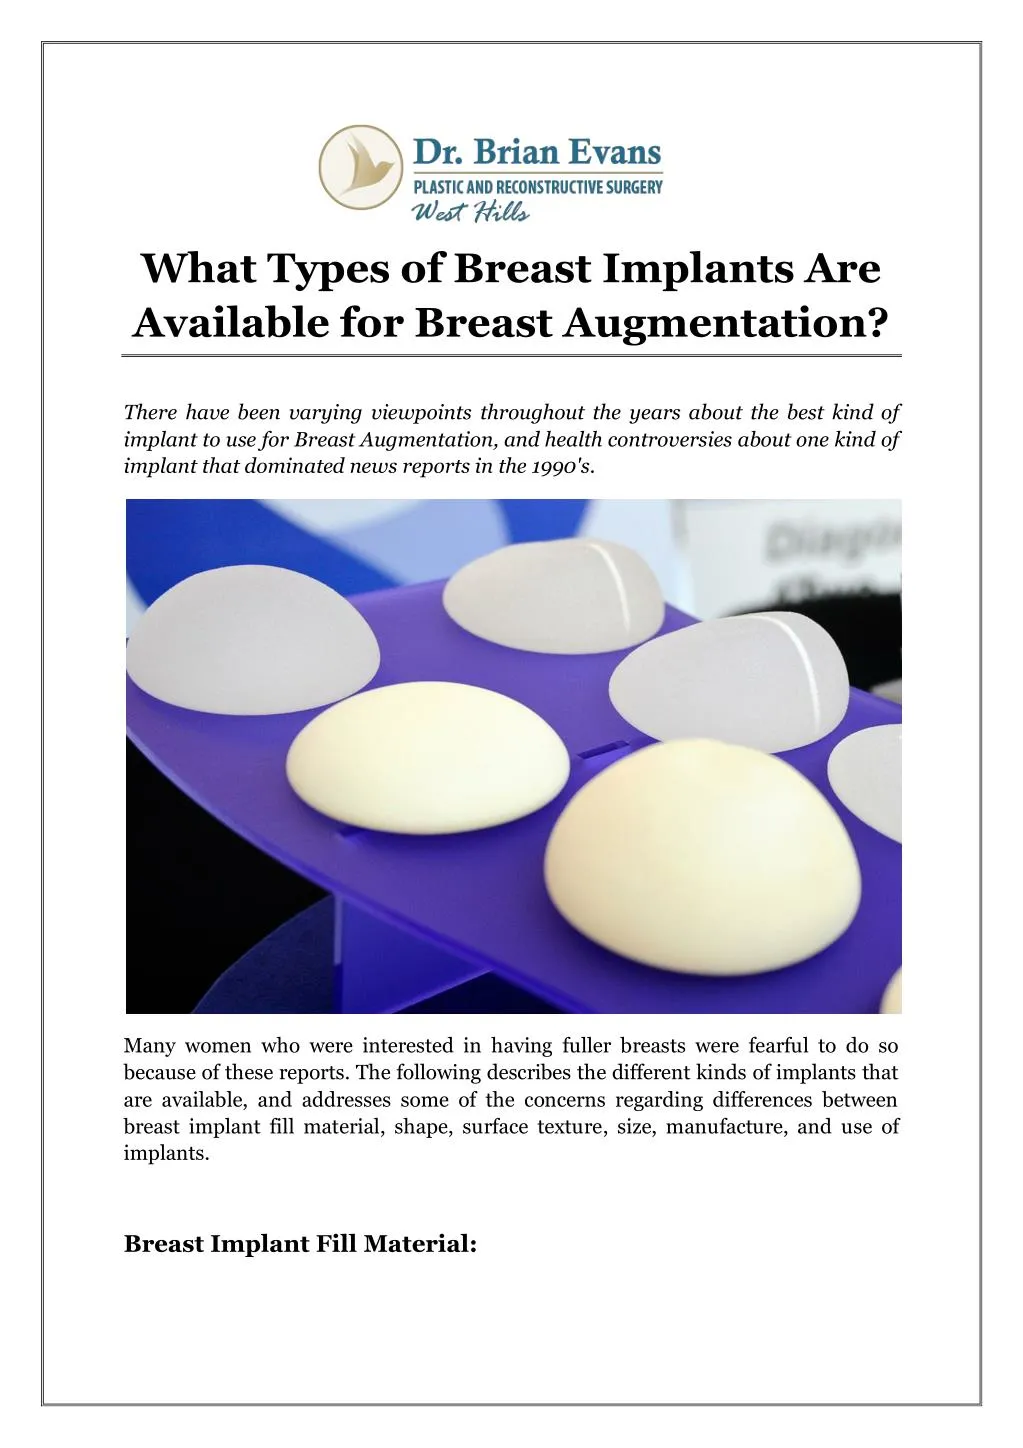 PPT - What Types of Breast Implants Are Available for Breast Augmentation?  PowerPoint Presentation - ID:7514008